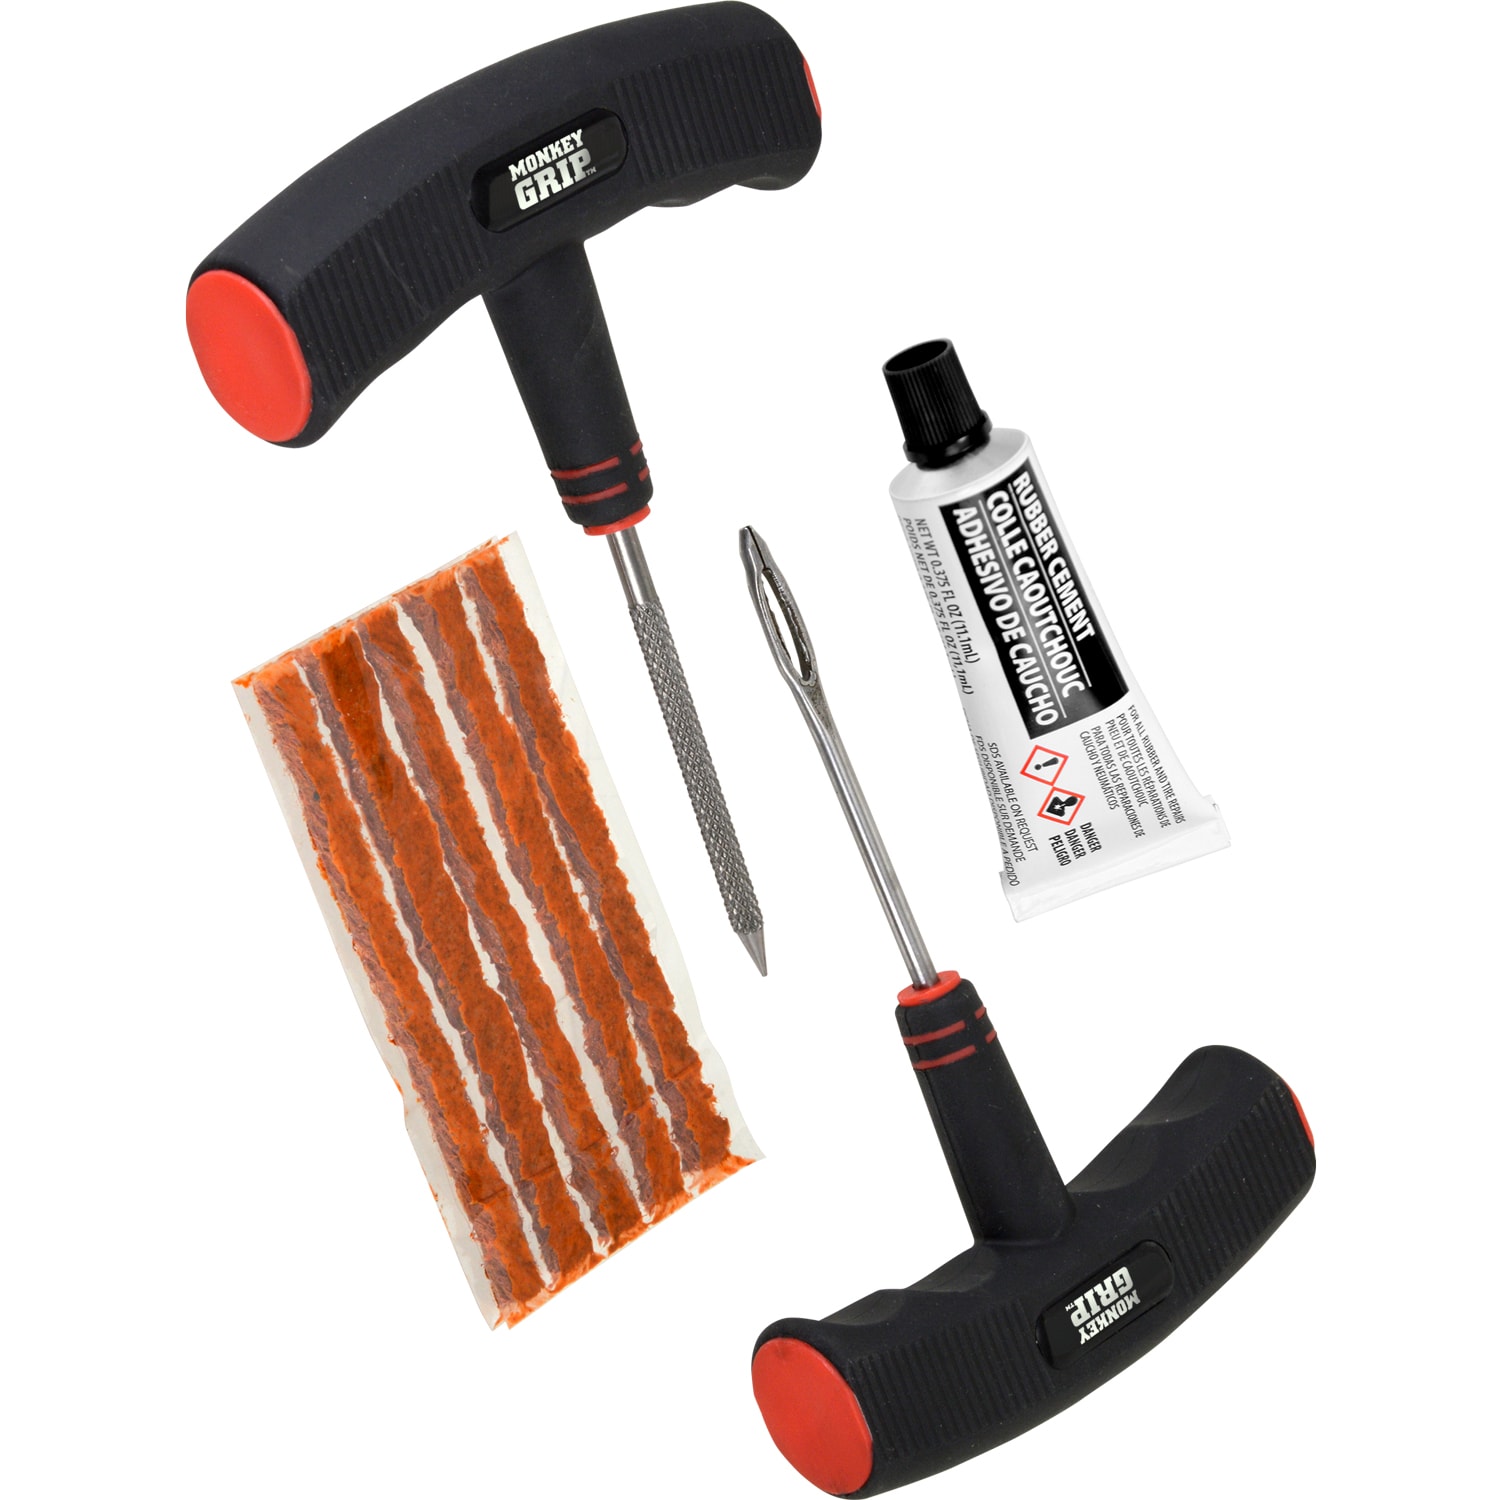 Monkey Grip Heavy Duty Tire Repair Kit - Co-Molded T-Handle Tools, 5 Plugs,  Rubber Cement